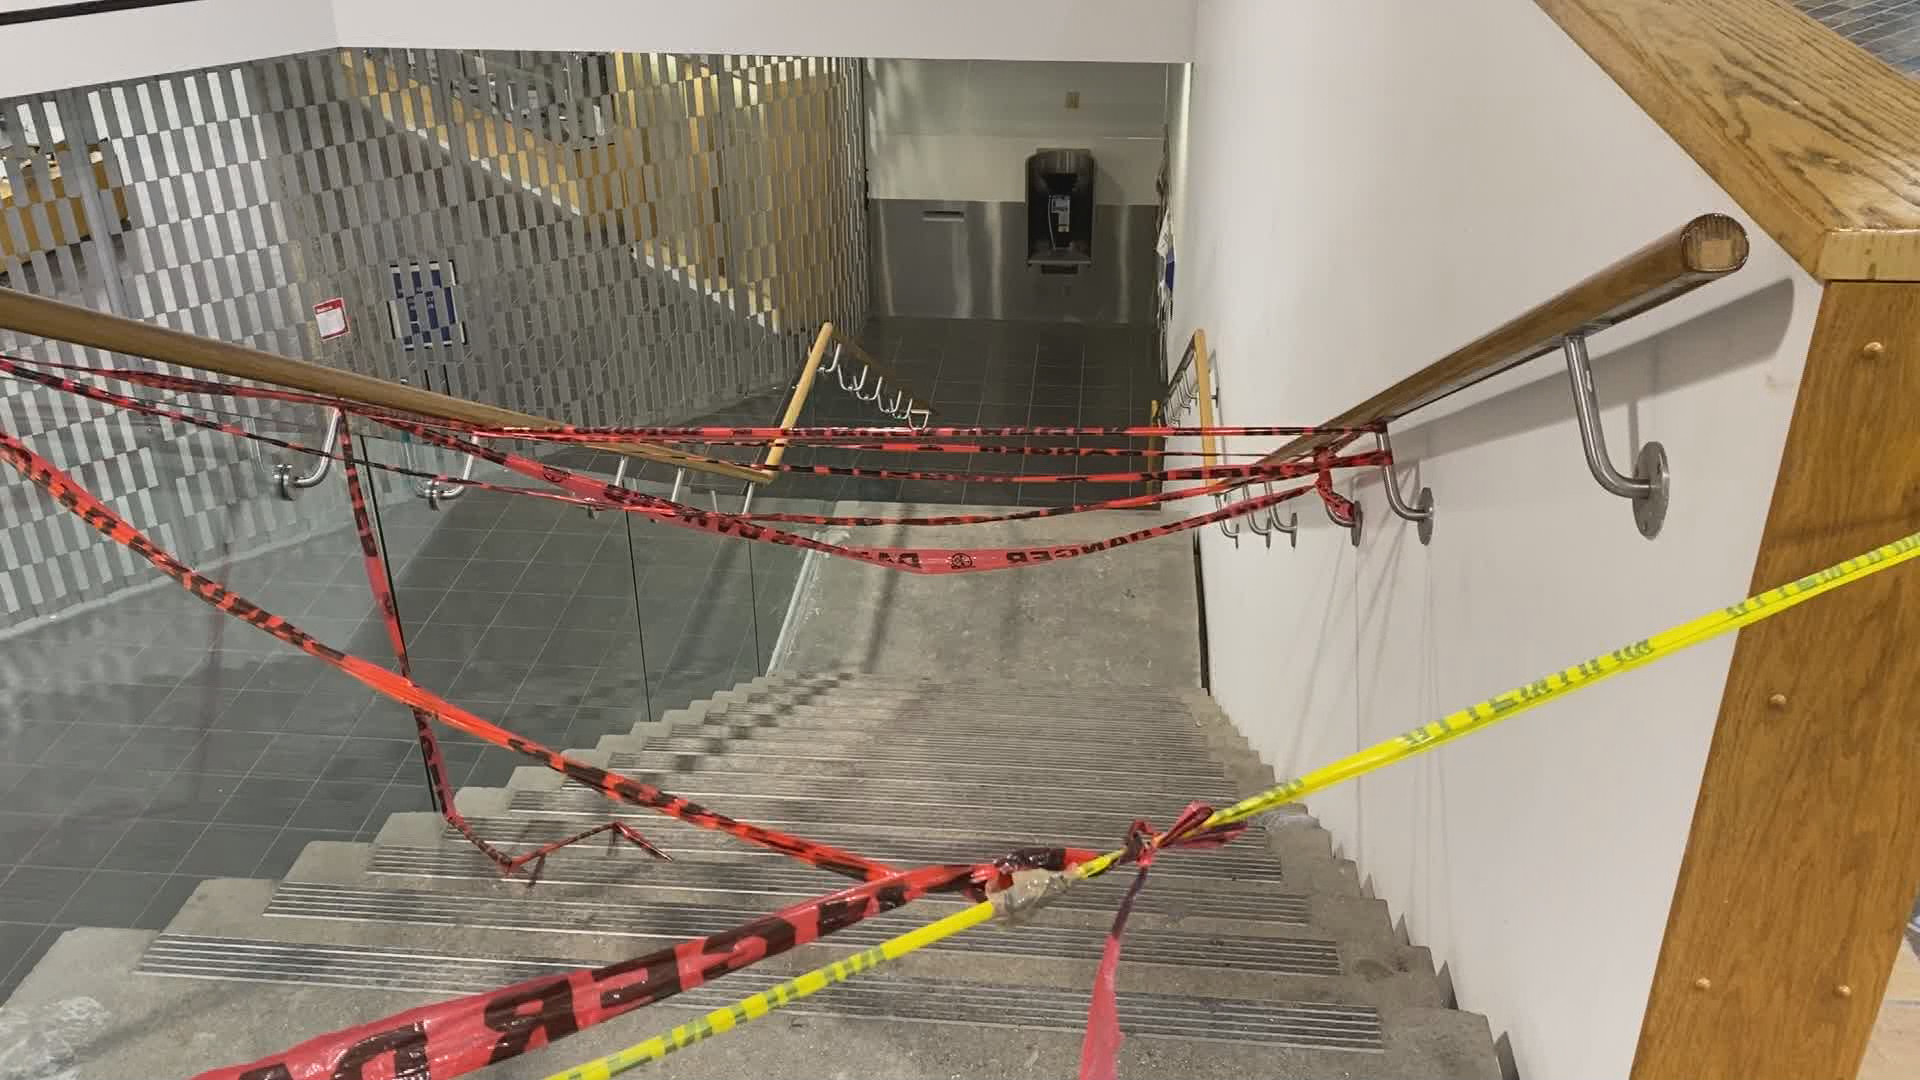 Police tape blocks off an entrance way to the Millennium Library following the stabbing attack in December 2022.